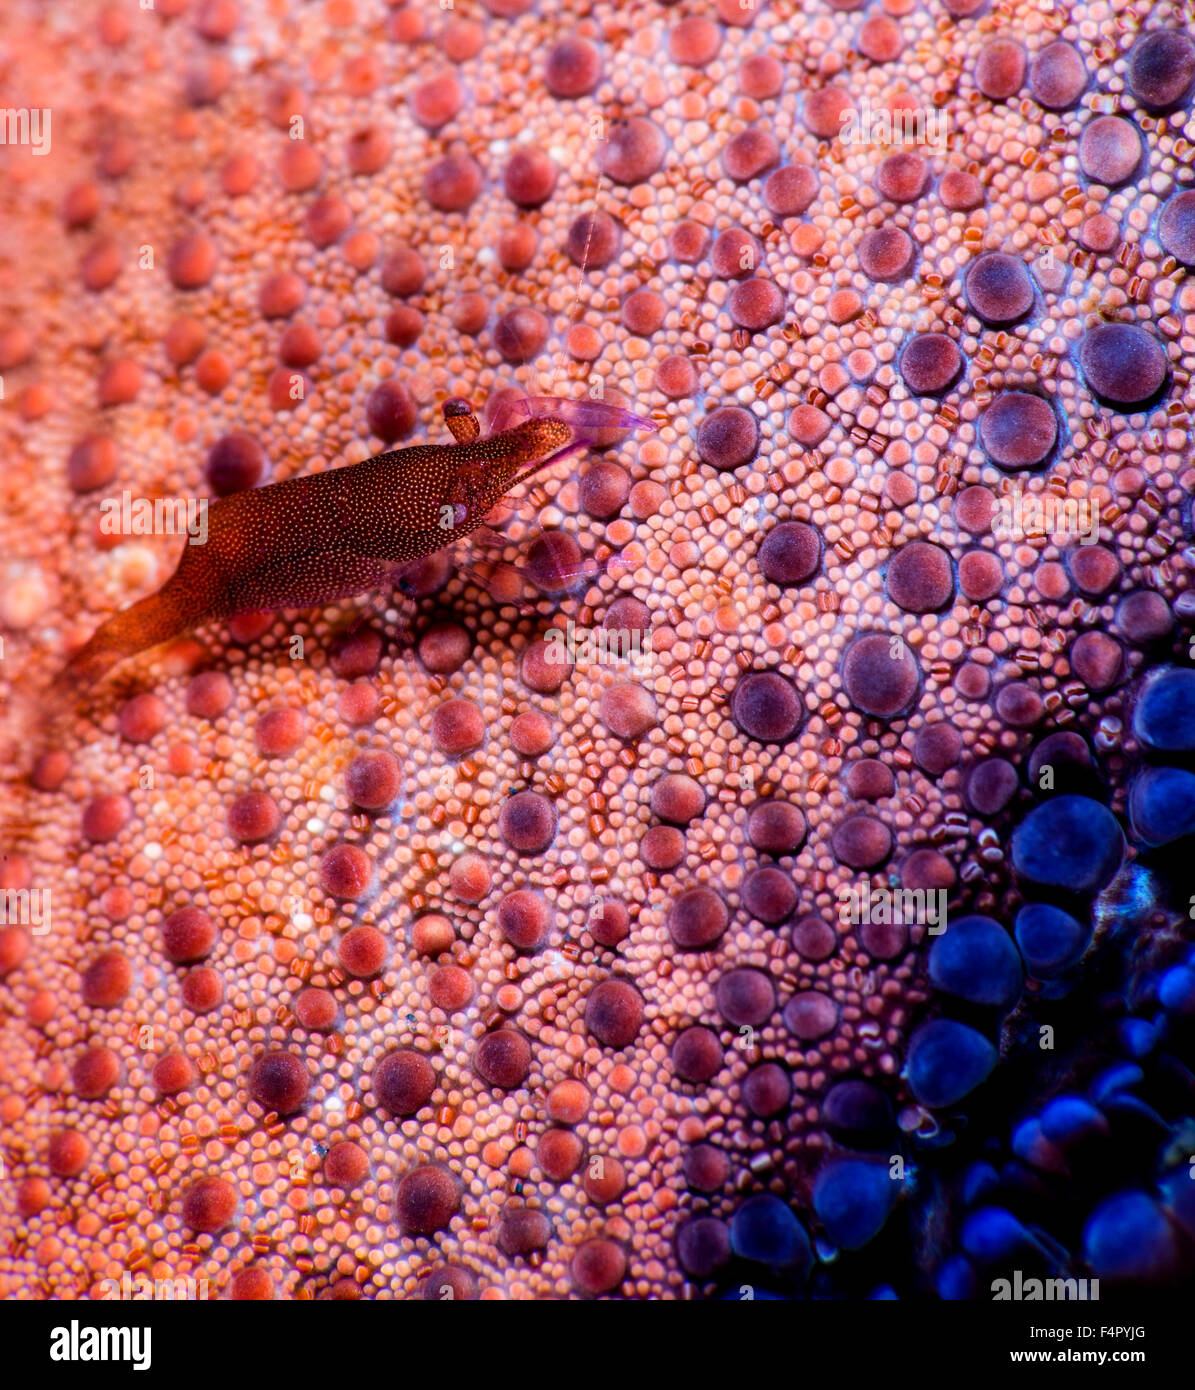 TIny Shrimp Living on the Underside of a Cashion Coral Sea Star Stock Photo